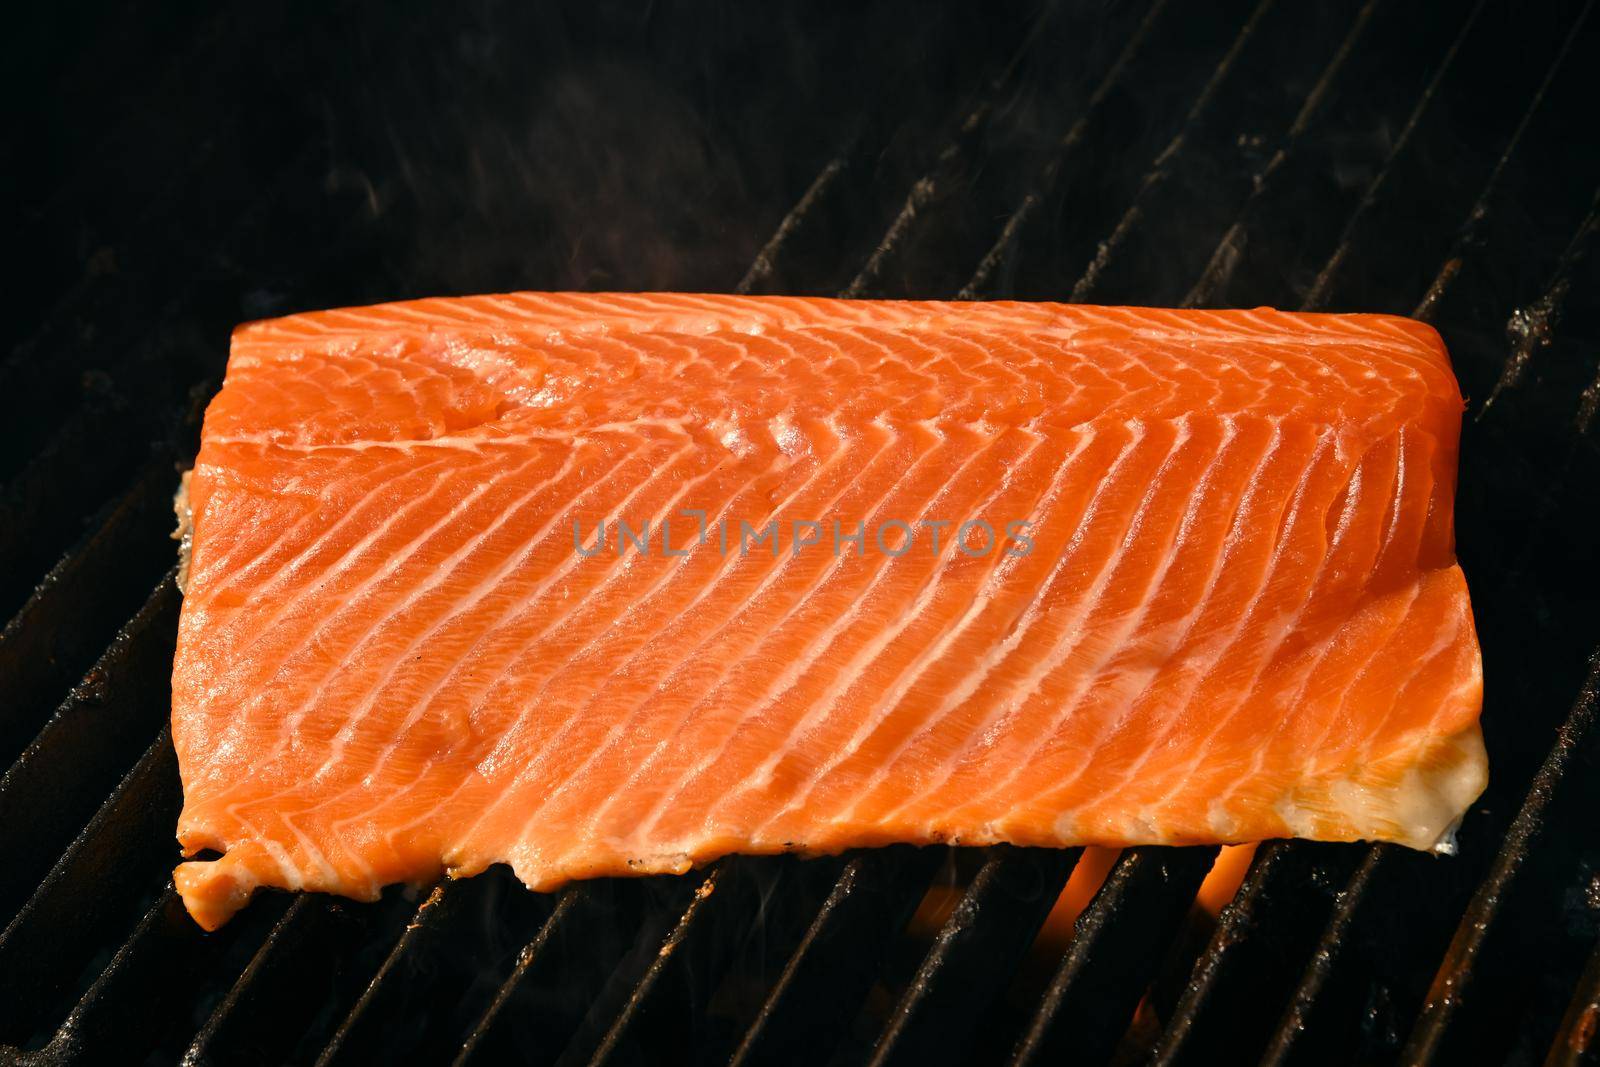 Close up searing and smoking salmon fish fillet on open fire outdoor grill with cast iron metal grate, high angle view